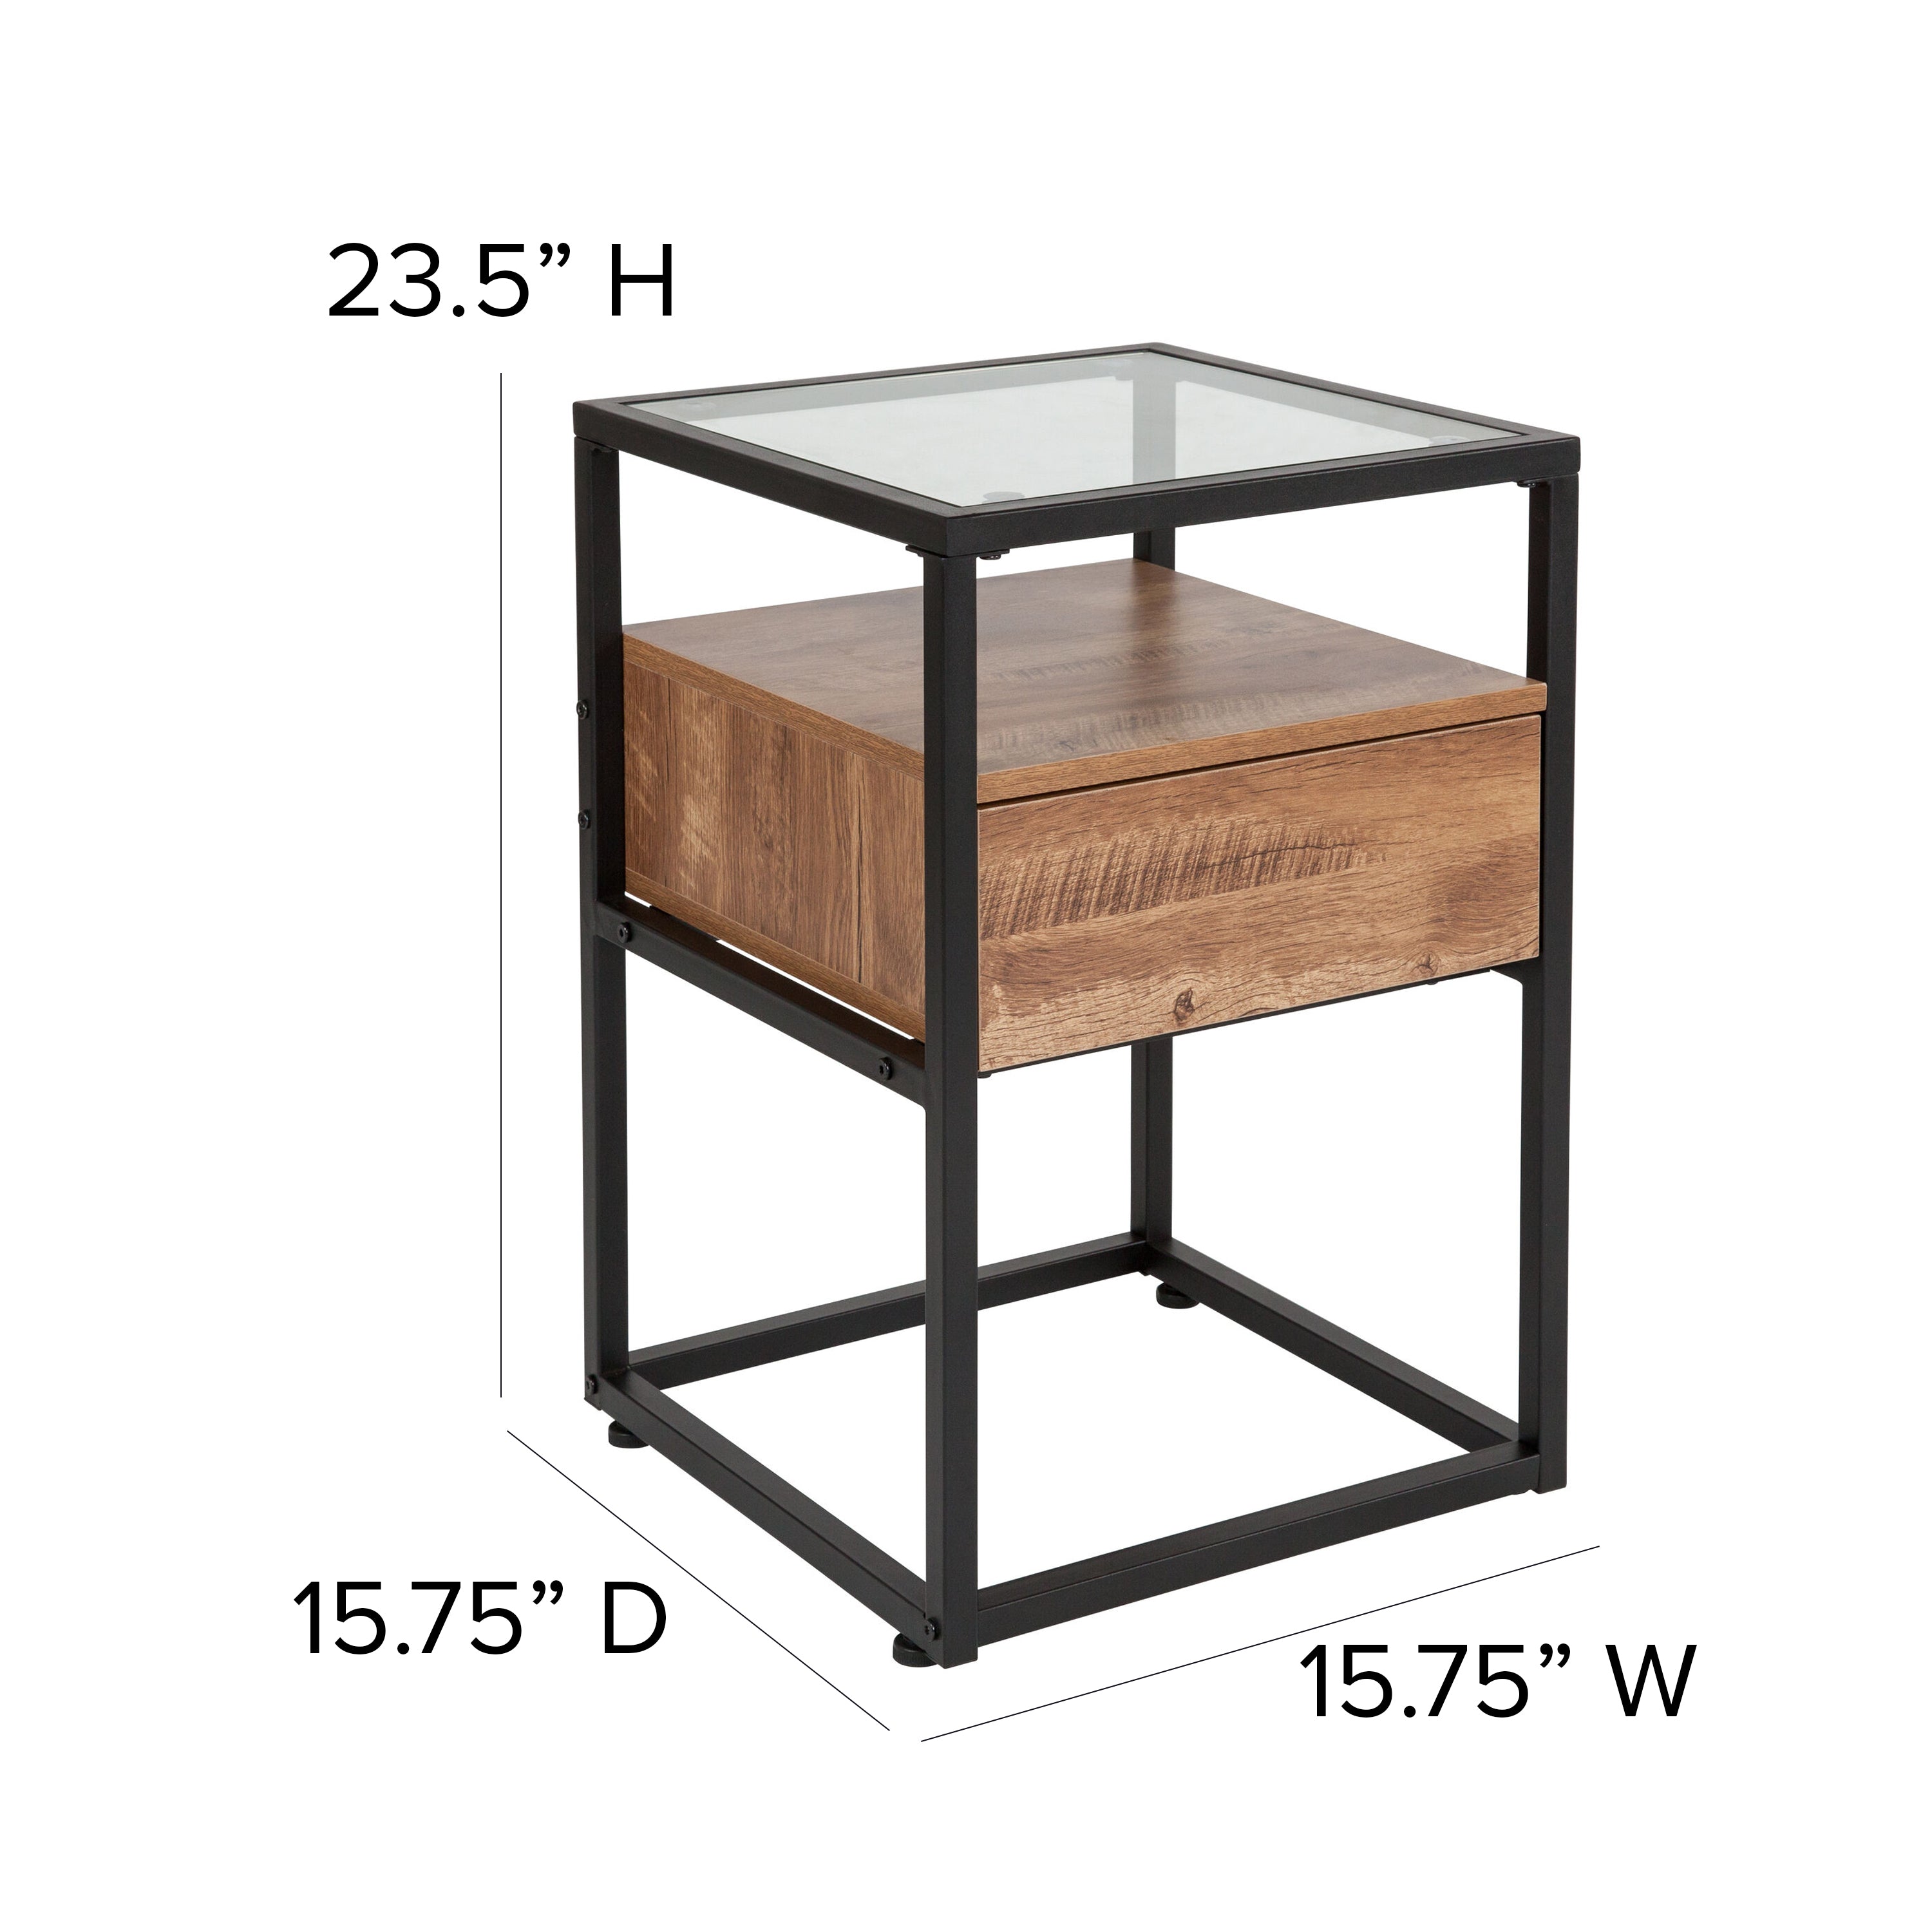 Cumberland Collection Glass Coffee Table with Drawer and Shelf in Wood Grain Finish-Residential Tables-Flash Furniture-Wall2Wall Furnishings